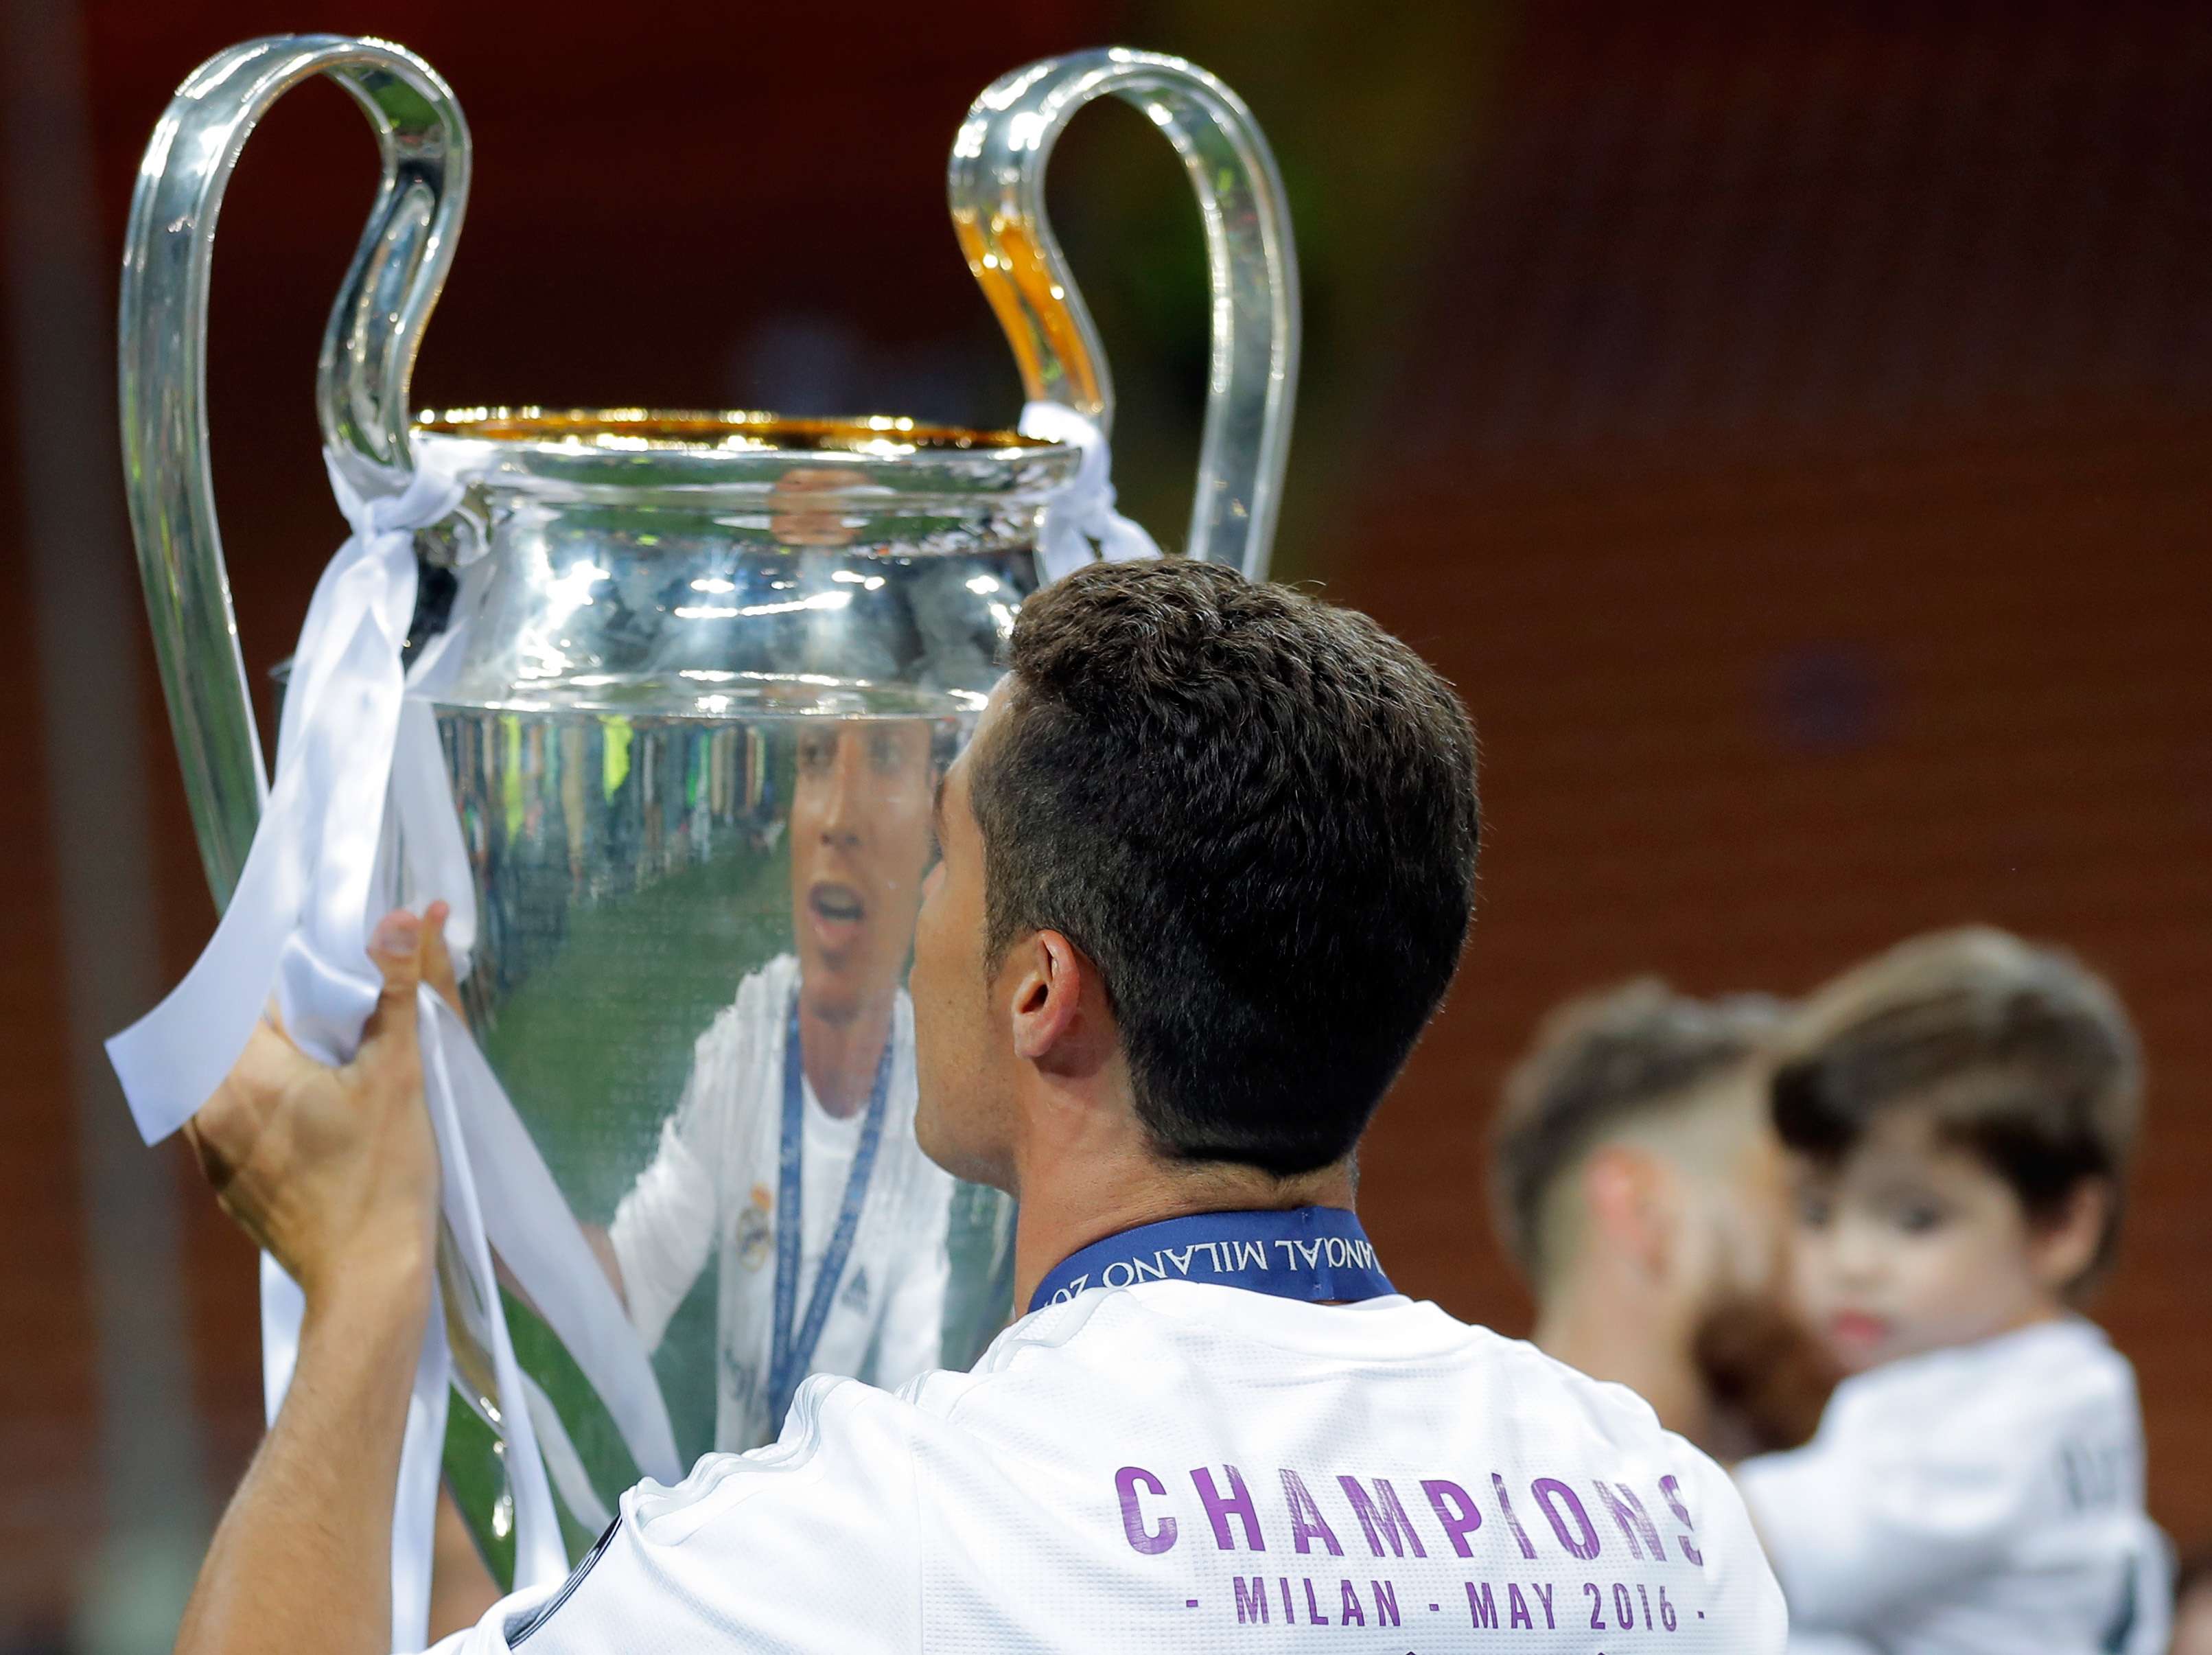 The future of the Uefa Champions League is in question and the fallout from the election of a new Uefa chief could be pivotal for the competitions future. Photo: AP